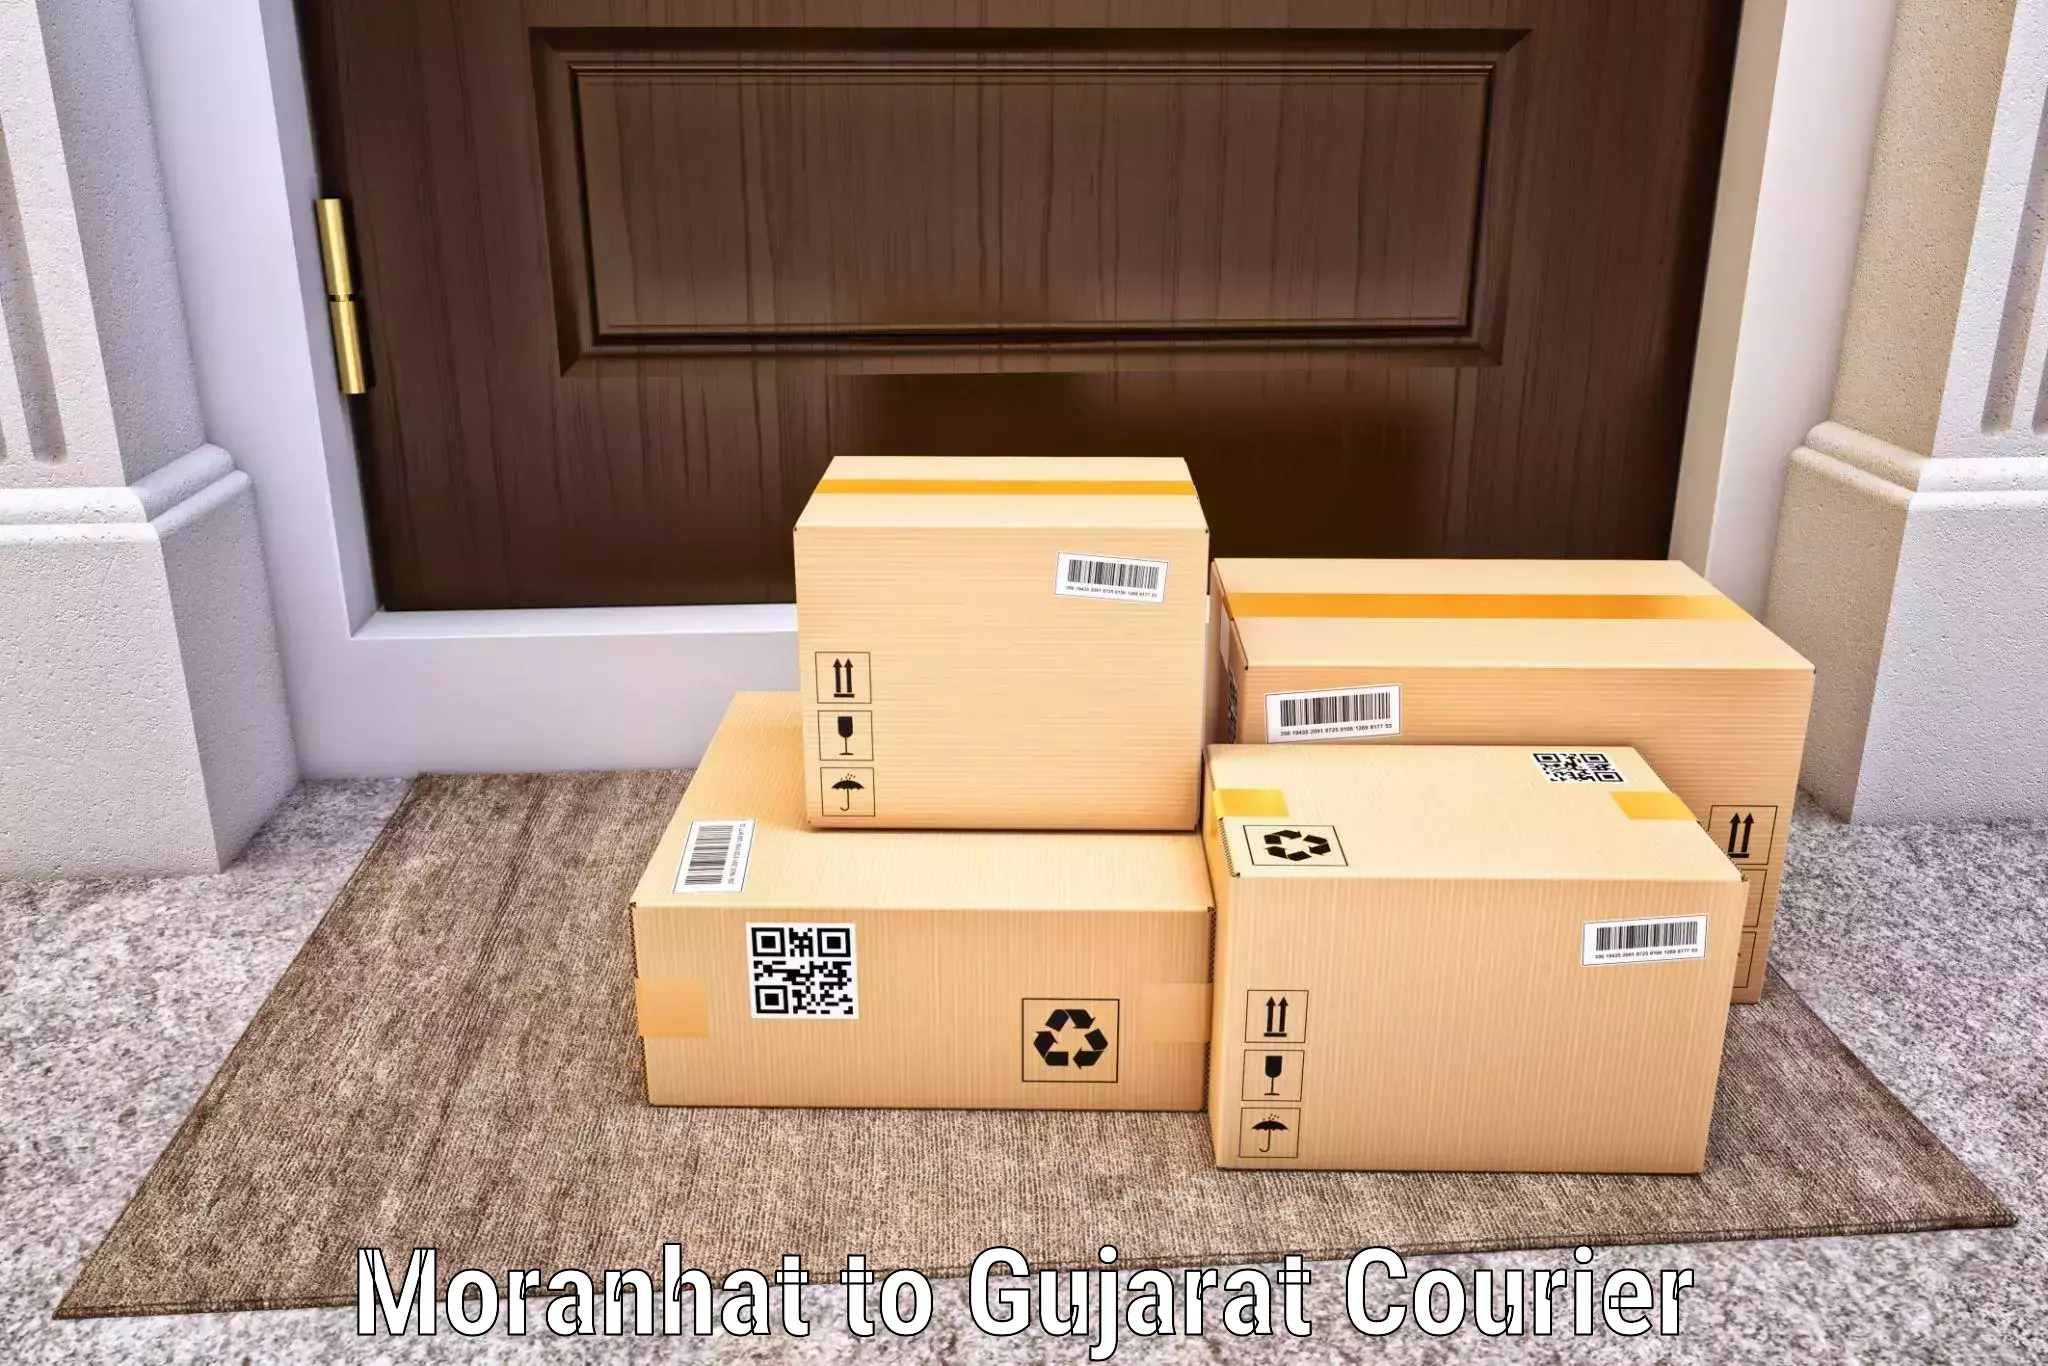 User-friendly courier app Moranhat to Ahmedabad